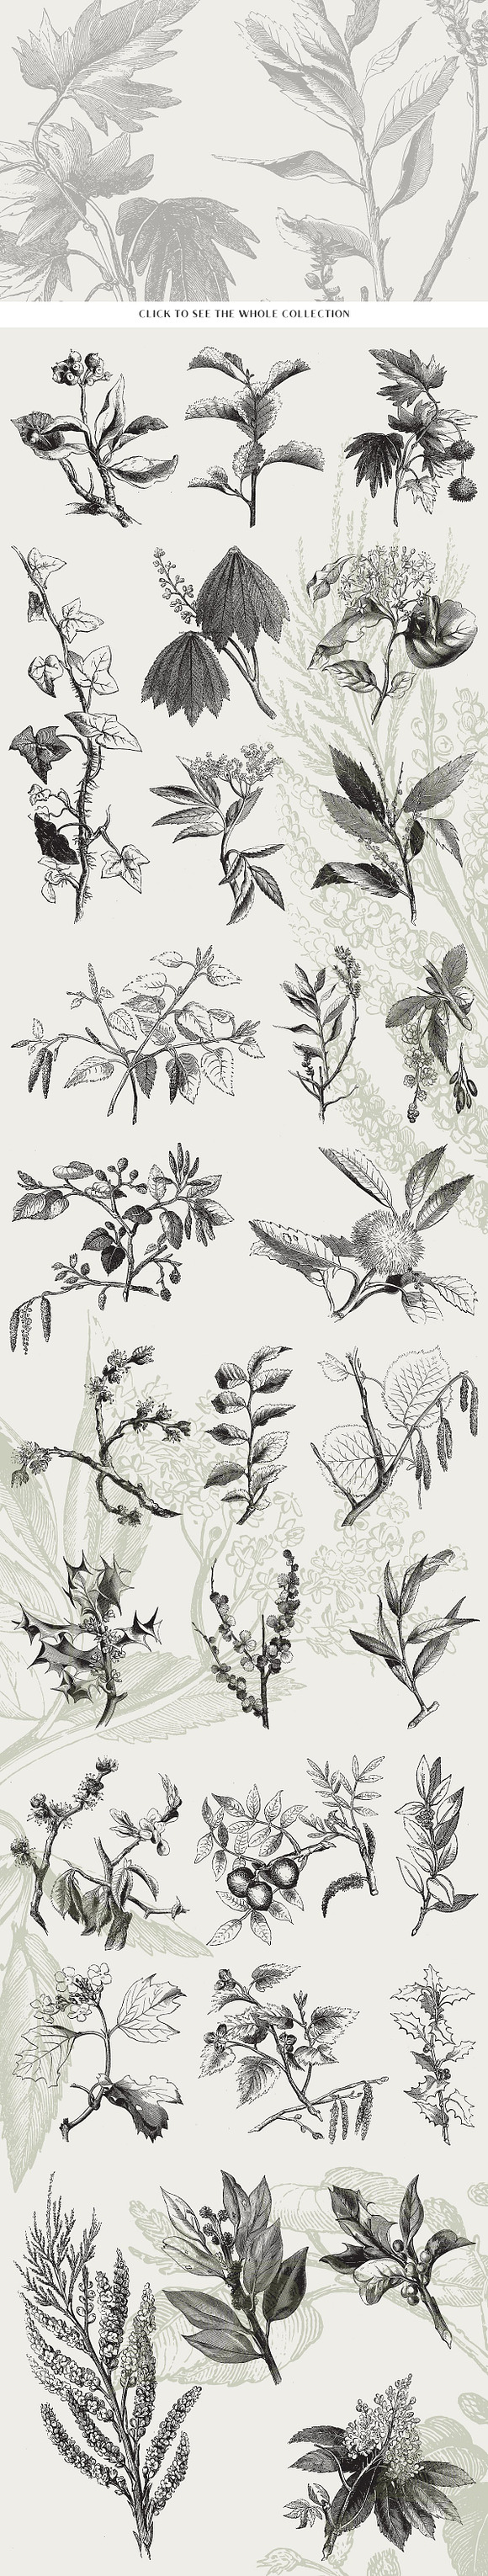 29 Branches, Twigs & Leaves (+Bonus) in Illustrations - product preview 1